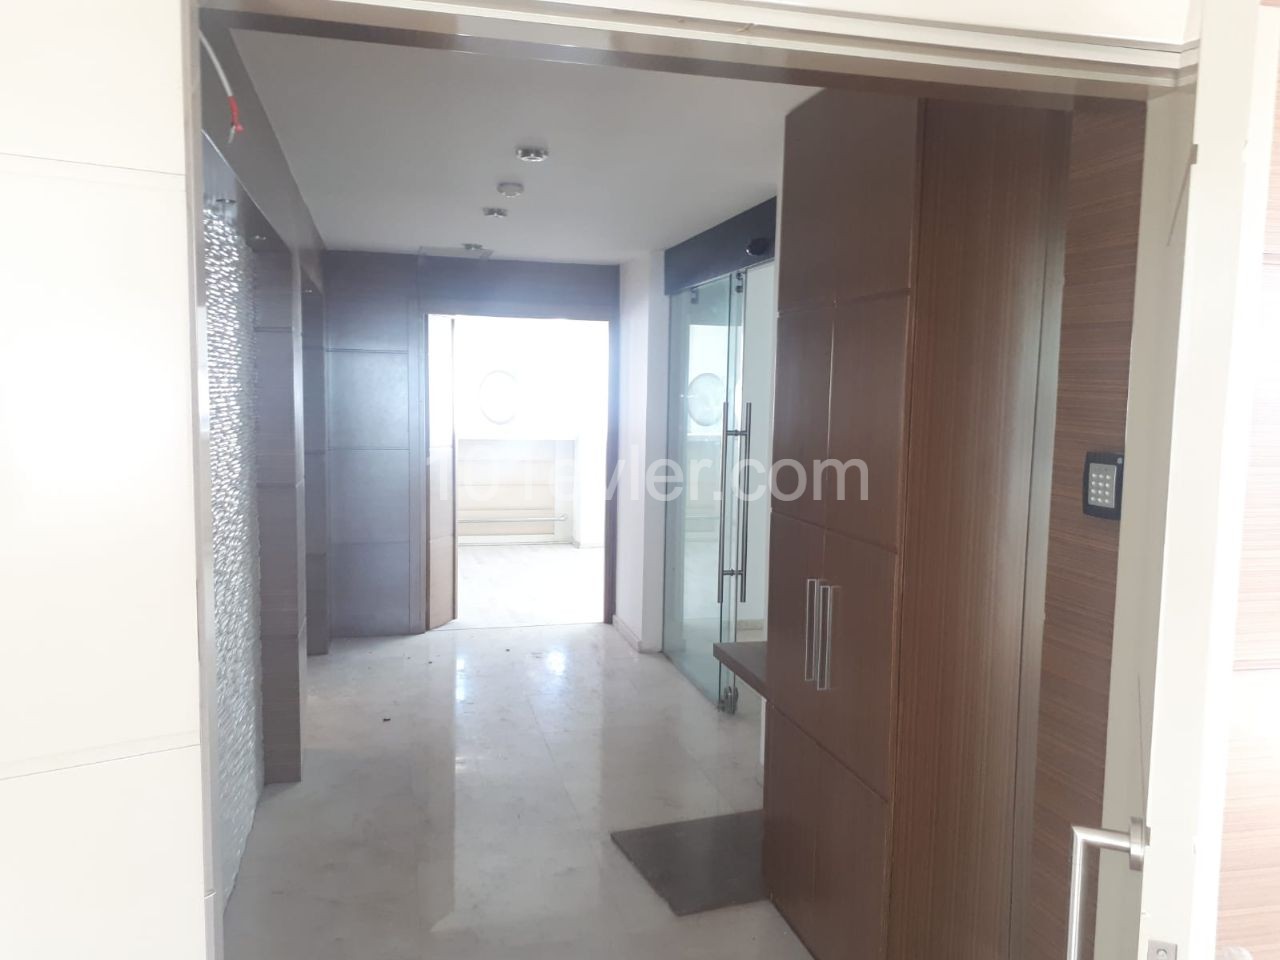  Complete Building for Rent in Kyrenia Center